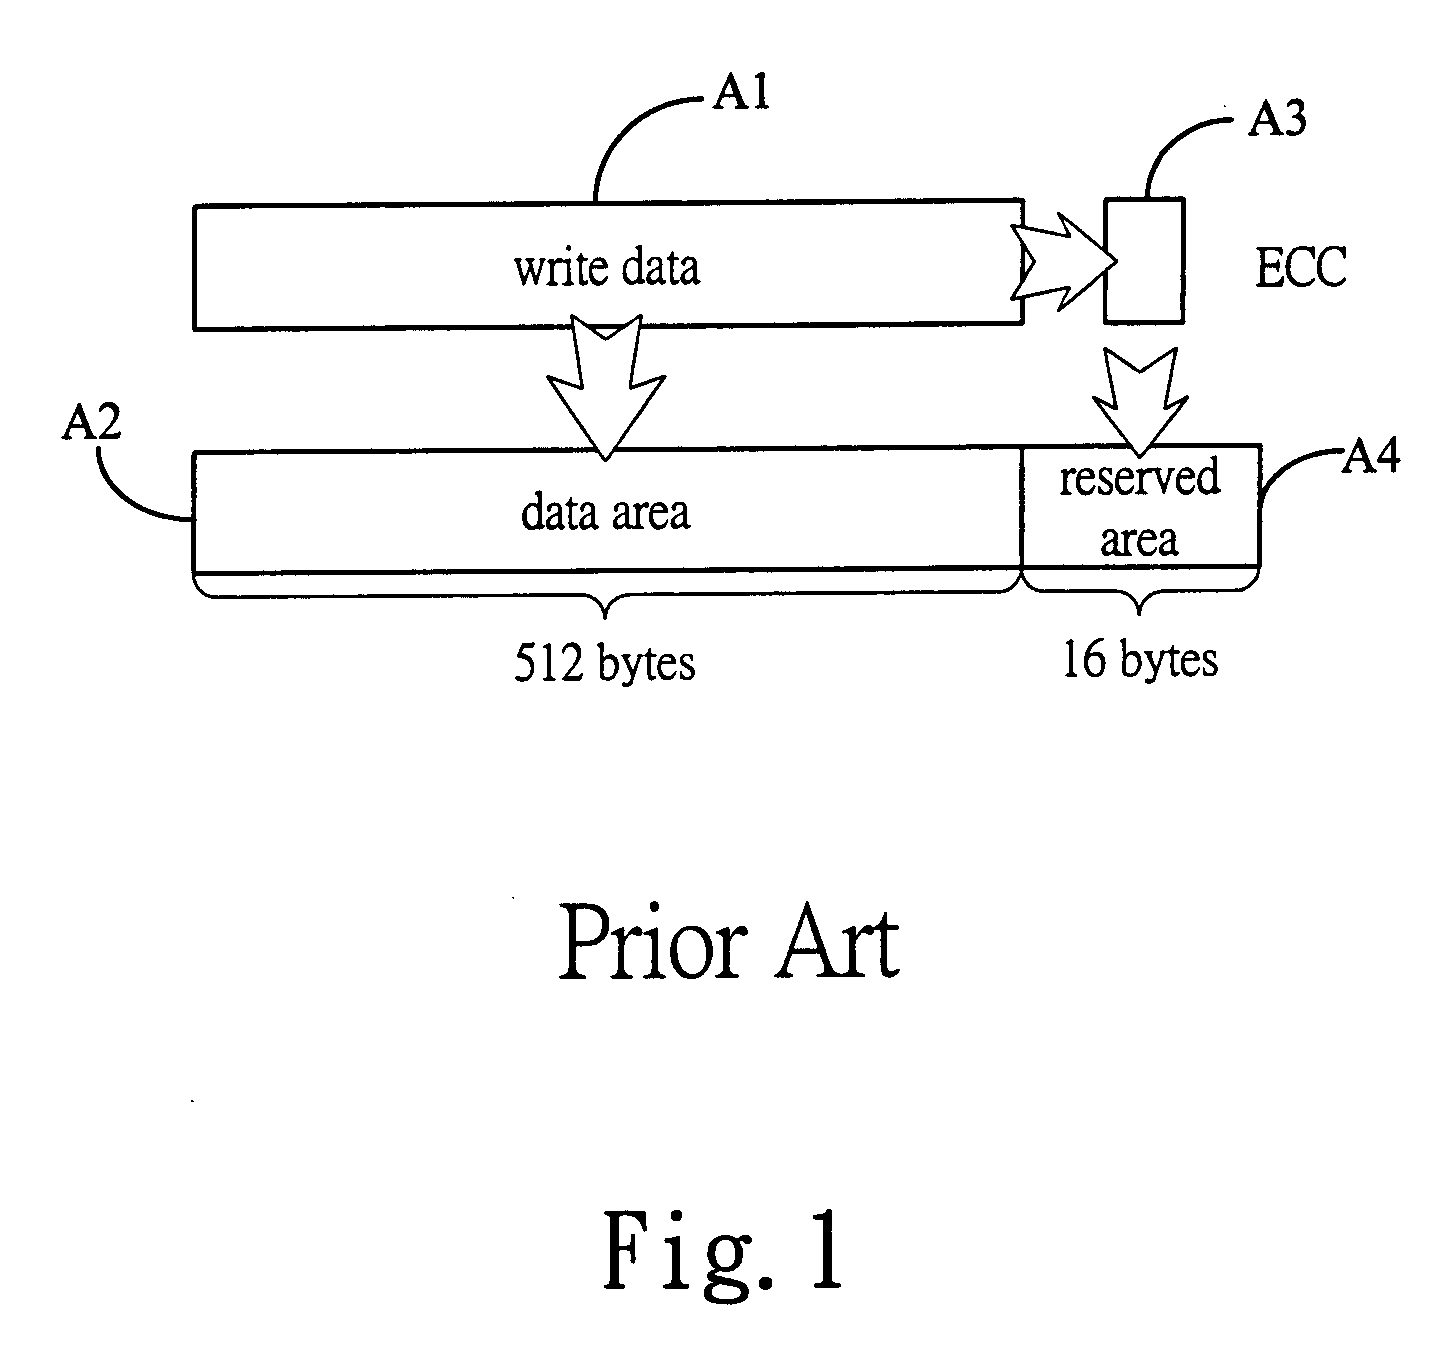 Apparatus for improving data access reliability of flash memory